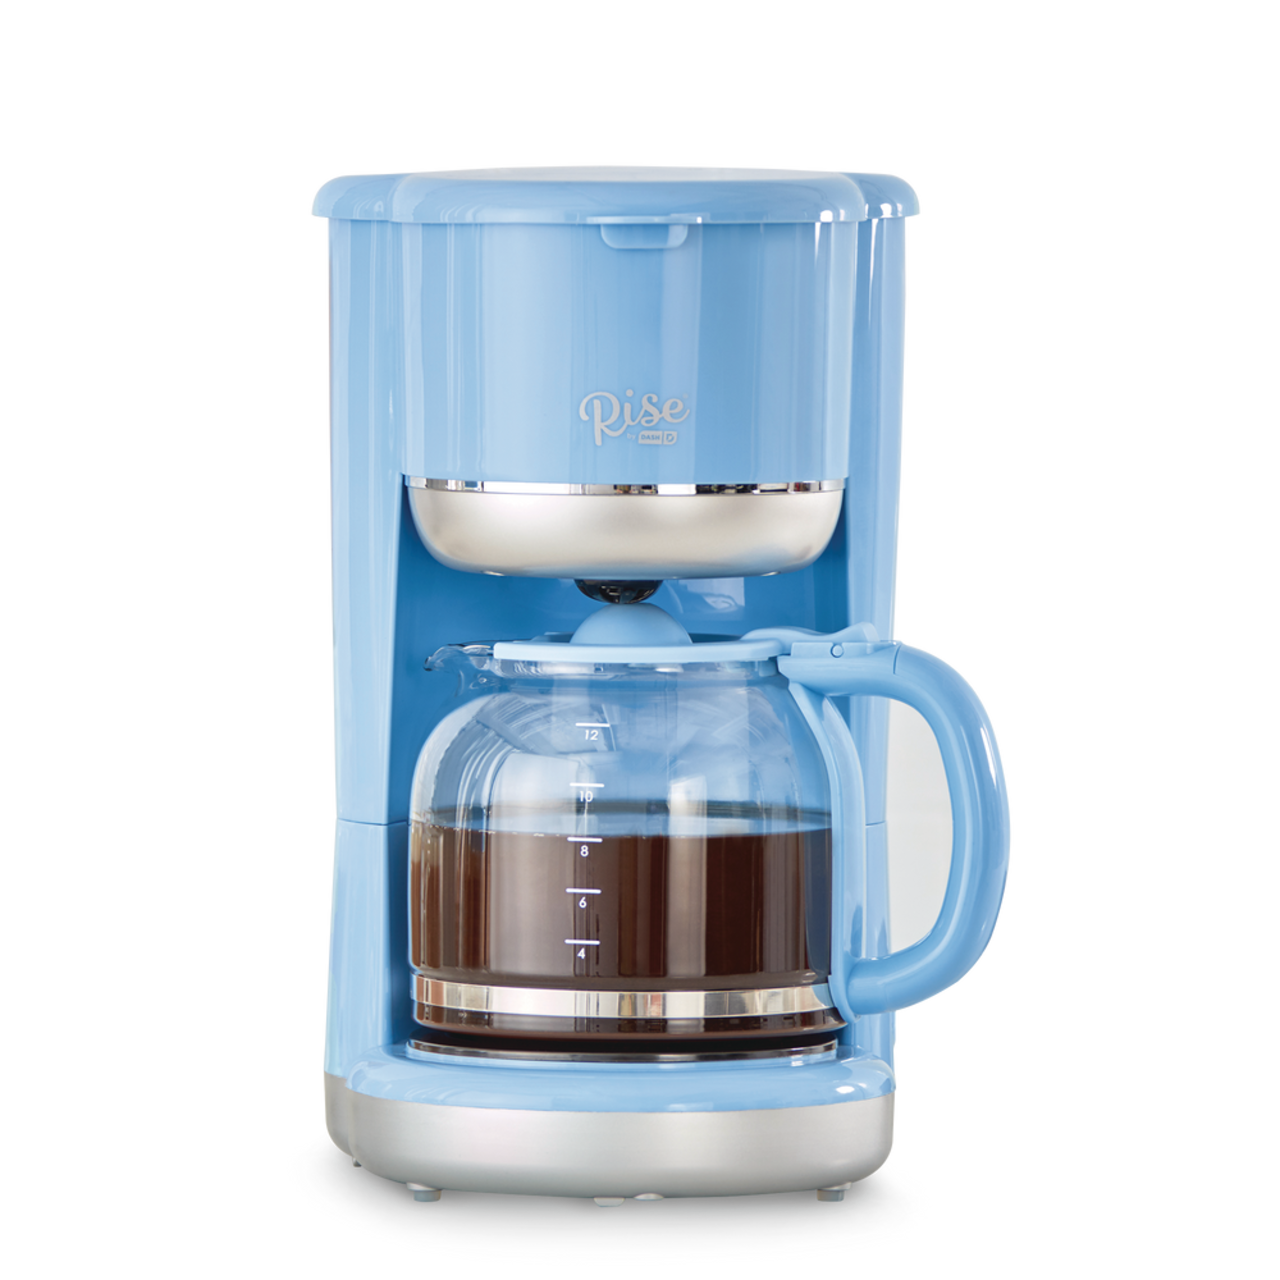 https://media-www.canadiantire.ca/product/living/kitchen/kitchen-appliances/0437059/rise-by-dash-10-cup-drip-coffee-maker-75dbce72-029a-4722-9b33-72747f027430.png?imdensity=1&imwidth=640&impolicy=mZoom